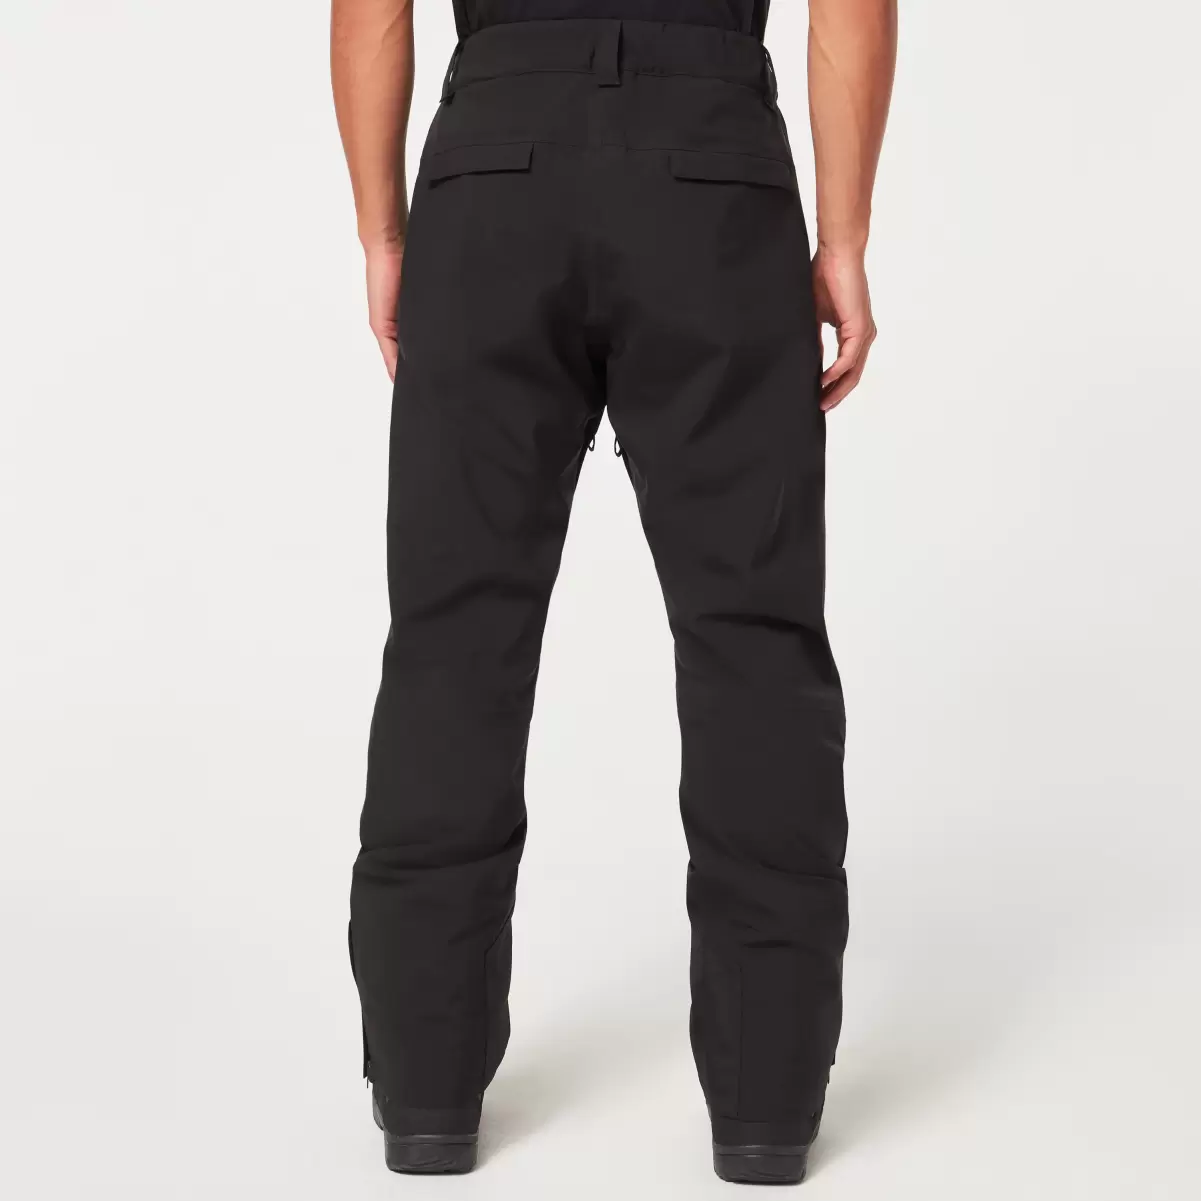 Men Oakley Axis Insulated Pant Pants Blackout - 4